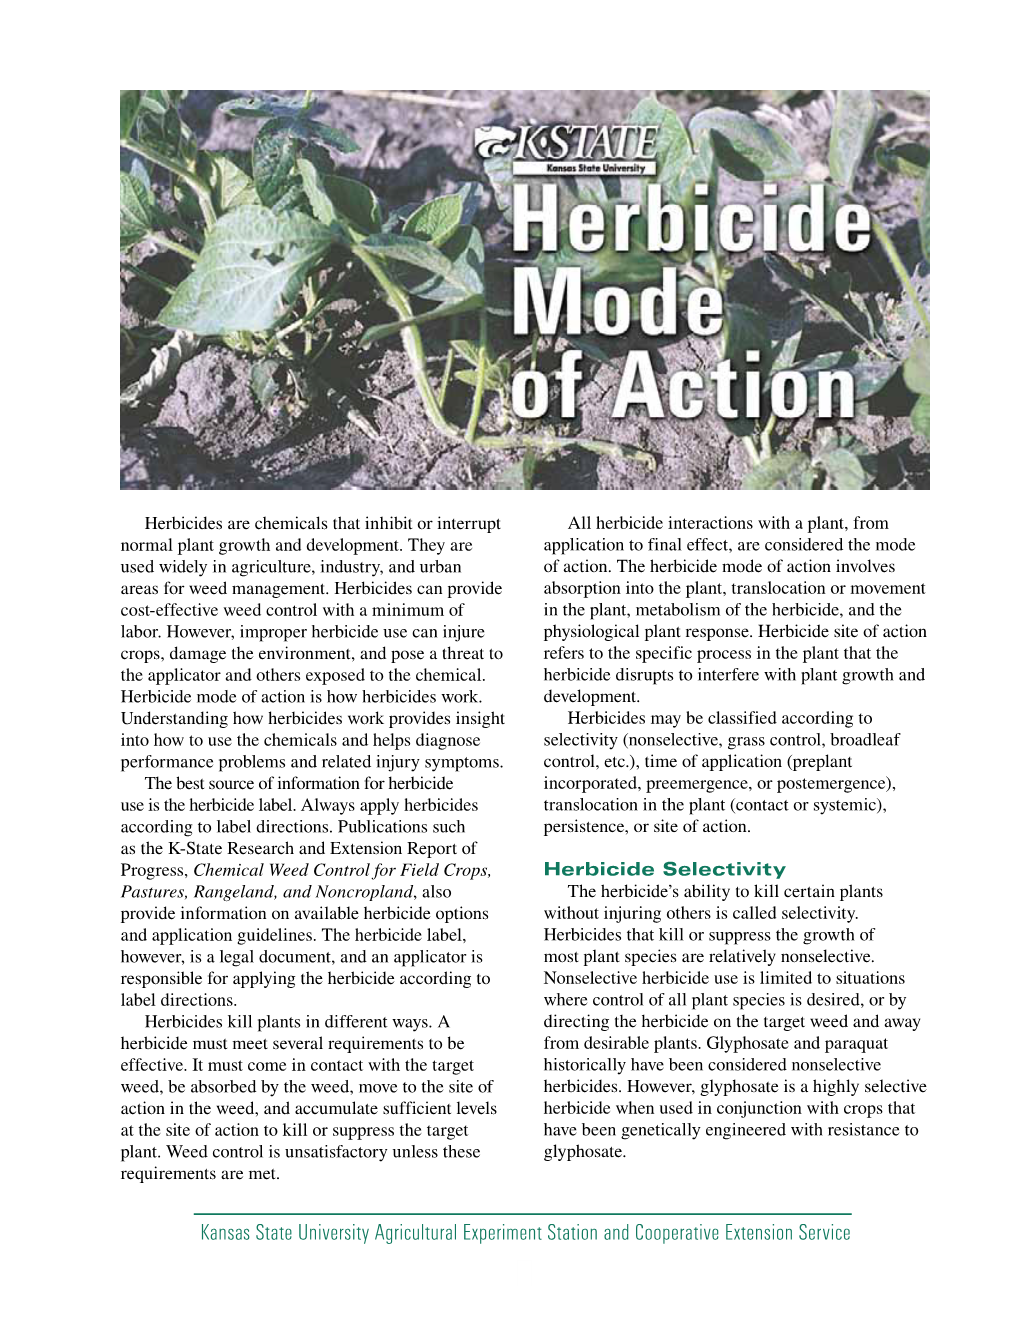 C715 Herbicide Mode of Action